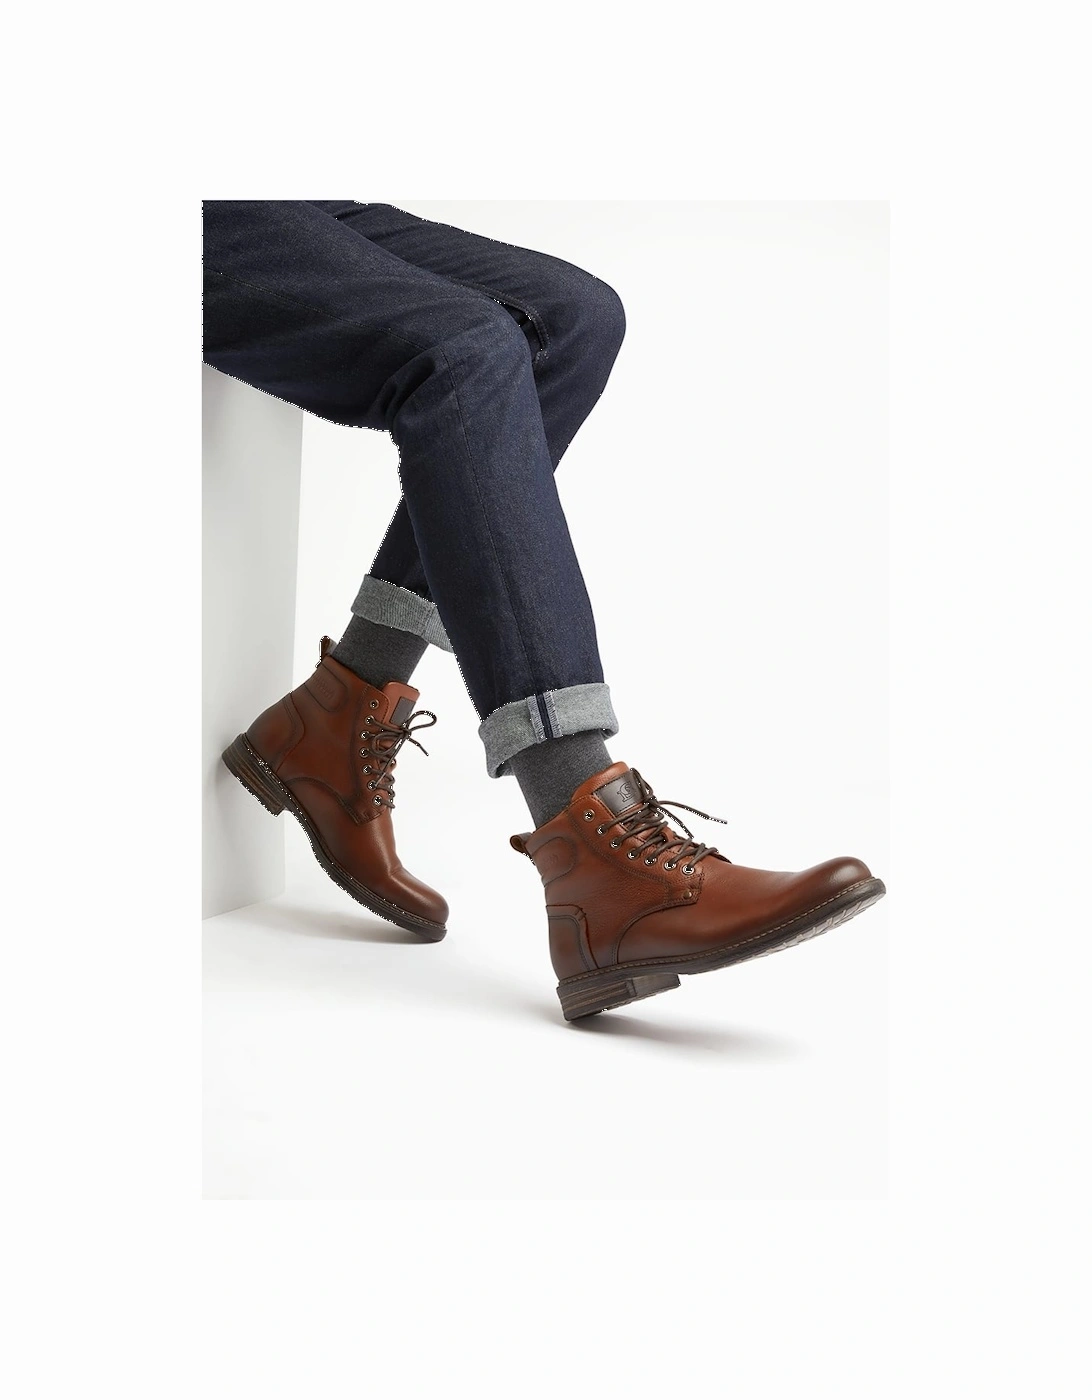 Mens Coreys - Lace Up Boots